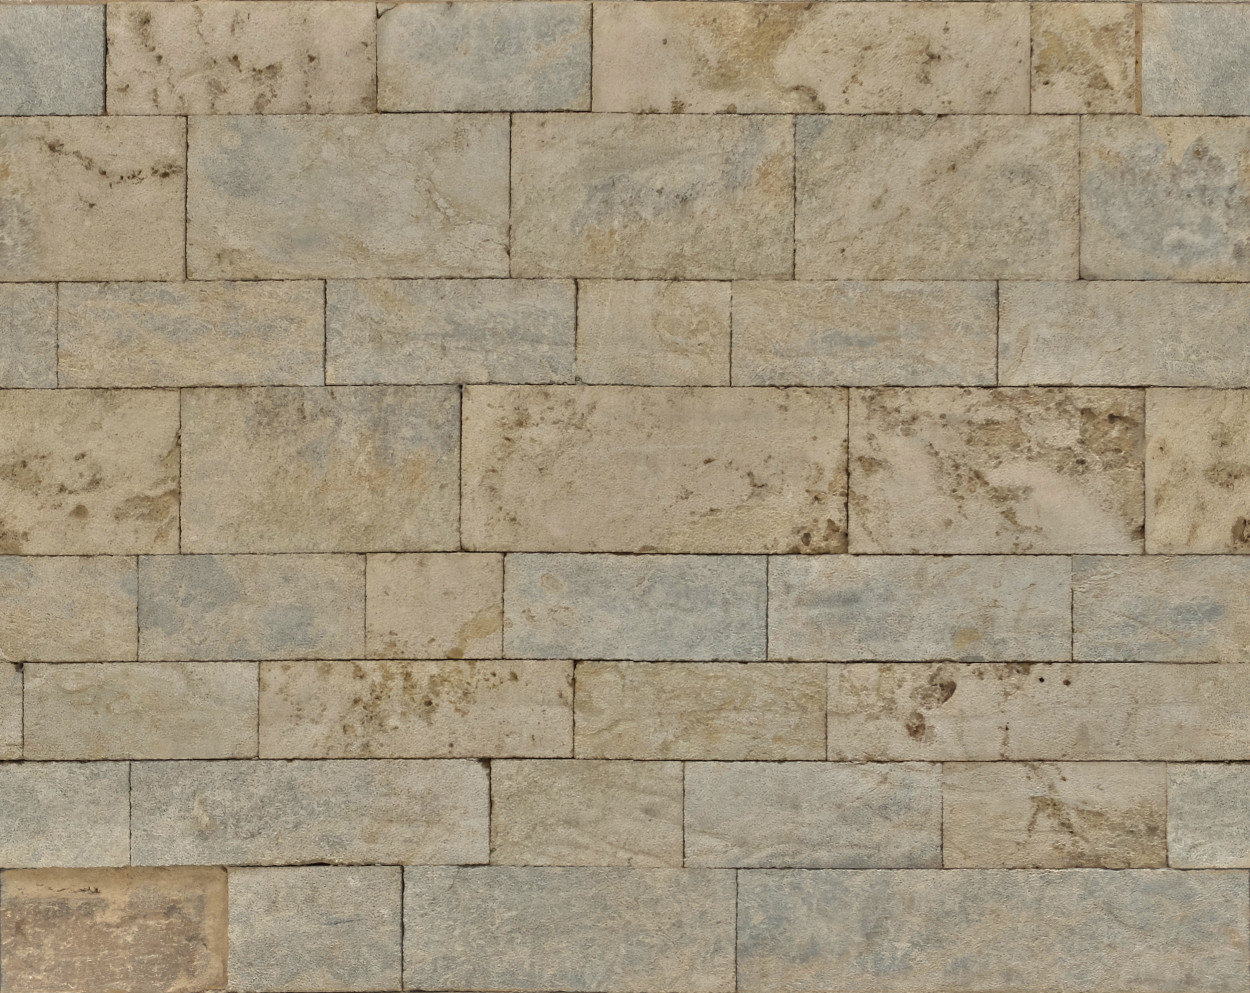 A seamless limestone wall texture for use in architectural drawings and 3D models